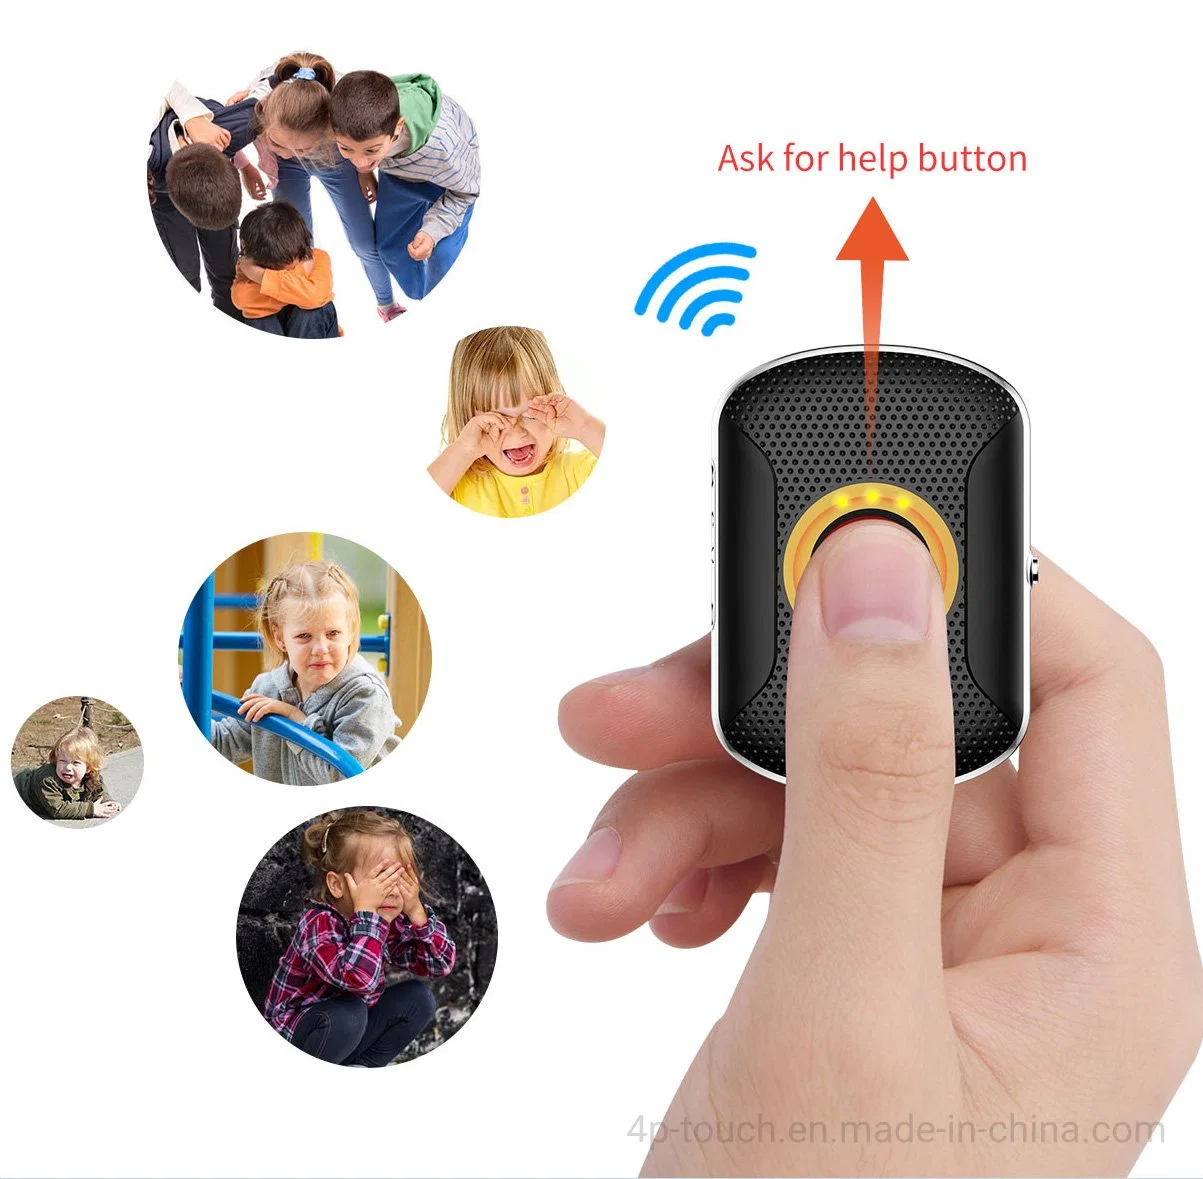 2023 New 4G hot selling Anti-lost Smart personal security Mini Tracker GPS with Global Tracking Location Y41